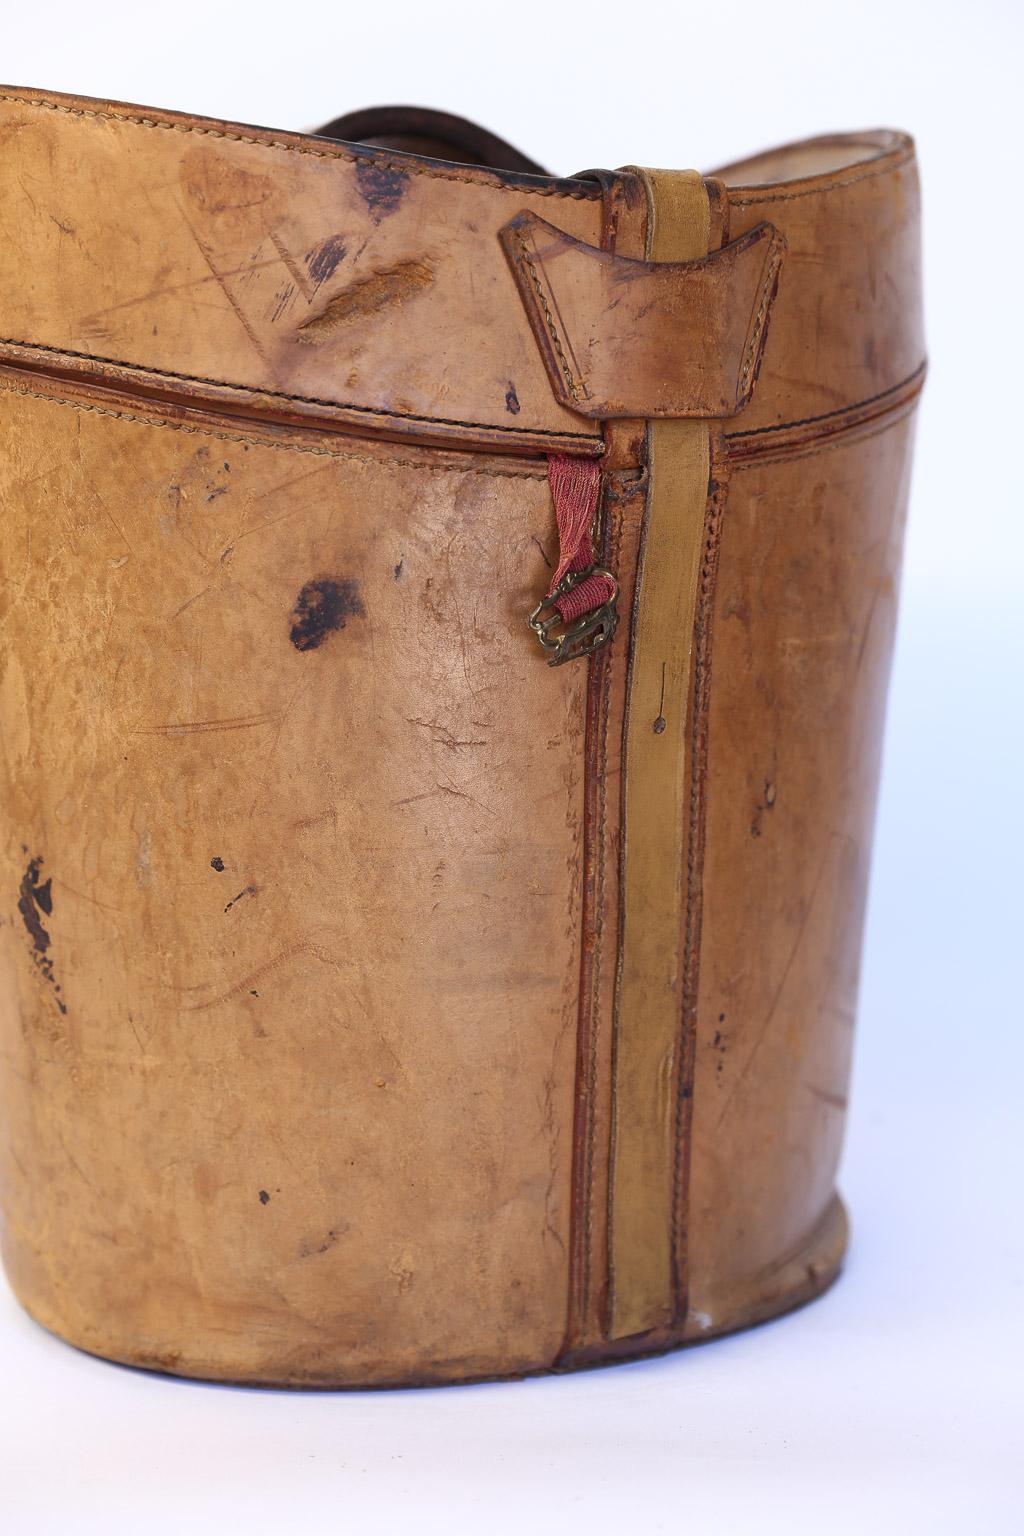 19th Century Leather Hat Box Containing Two Men's Hats 1